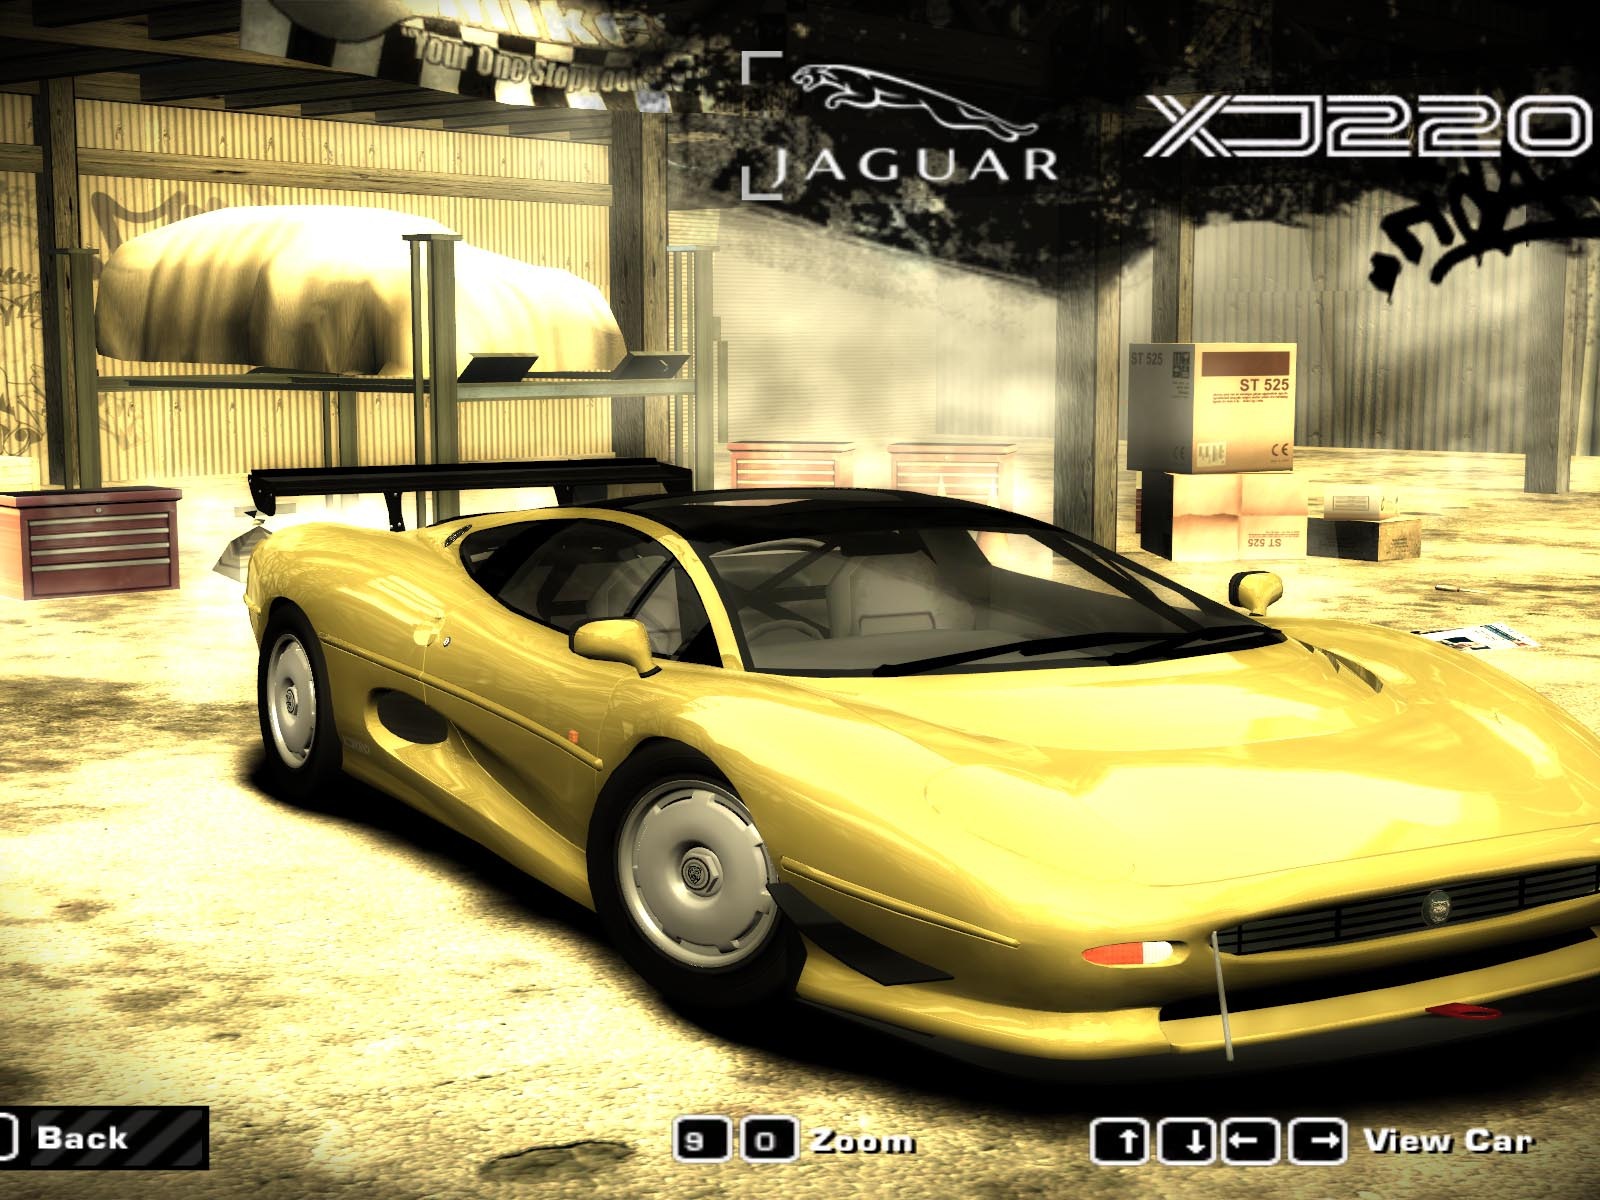 Need for Speed: Most Wanted 极品飞车17：最高通缉 高清壁纸5 - 1600x1200